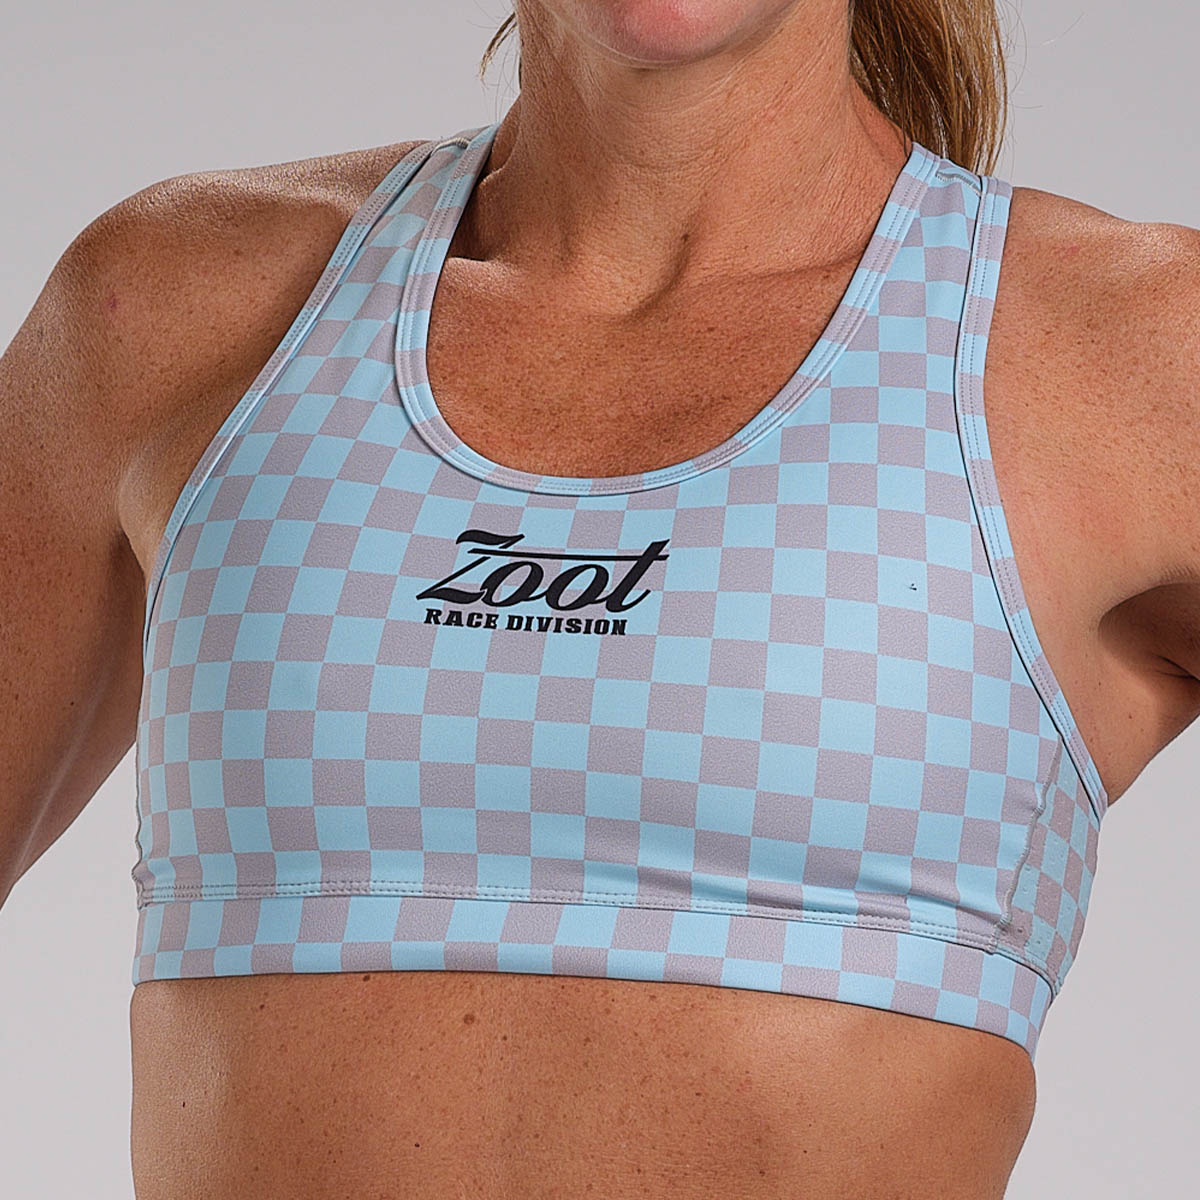  Sports Bras For Swimming